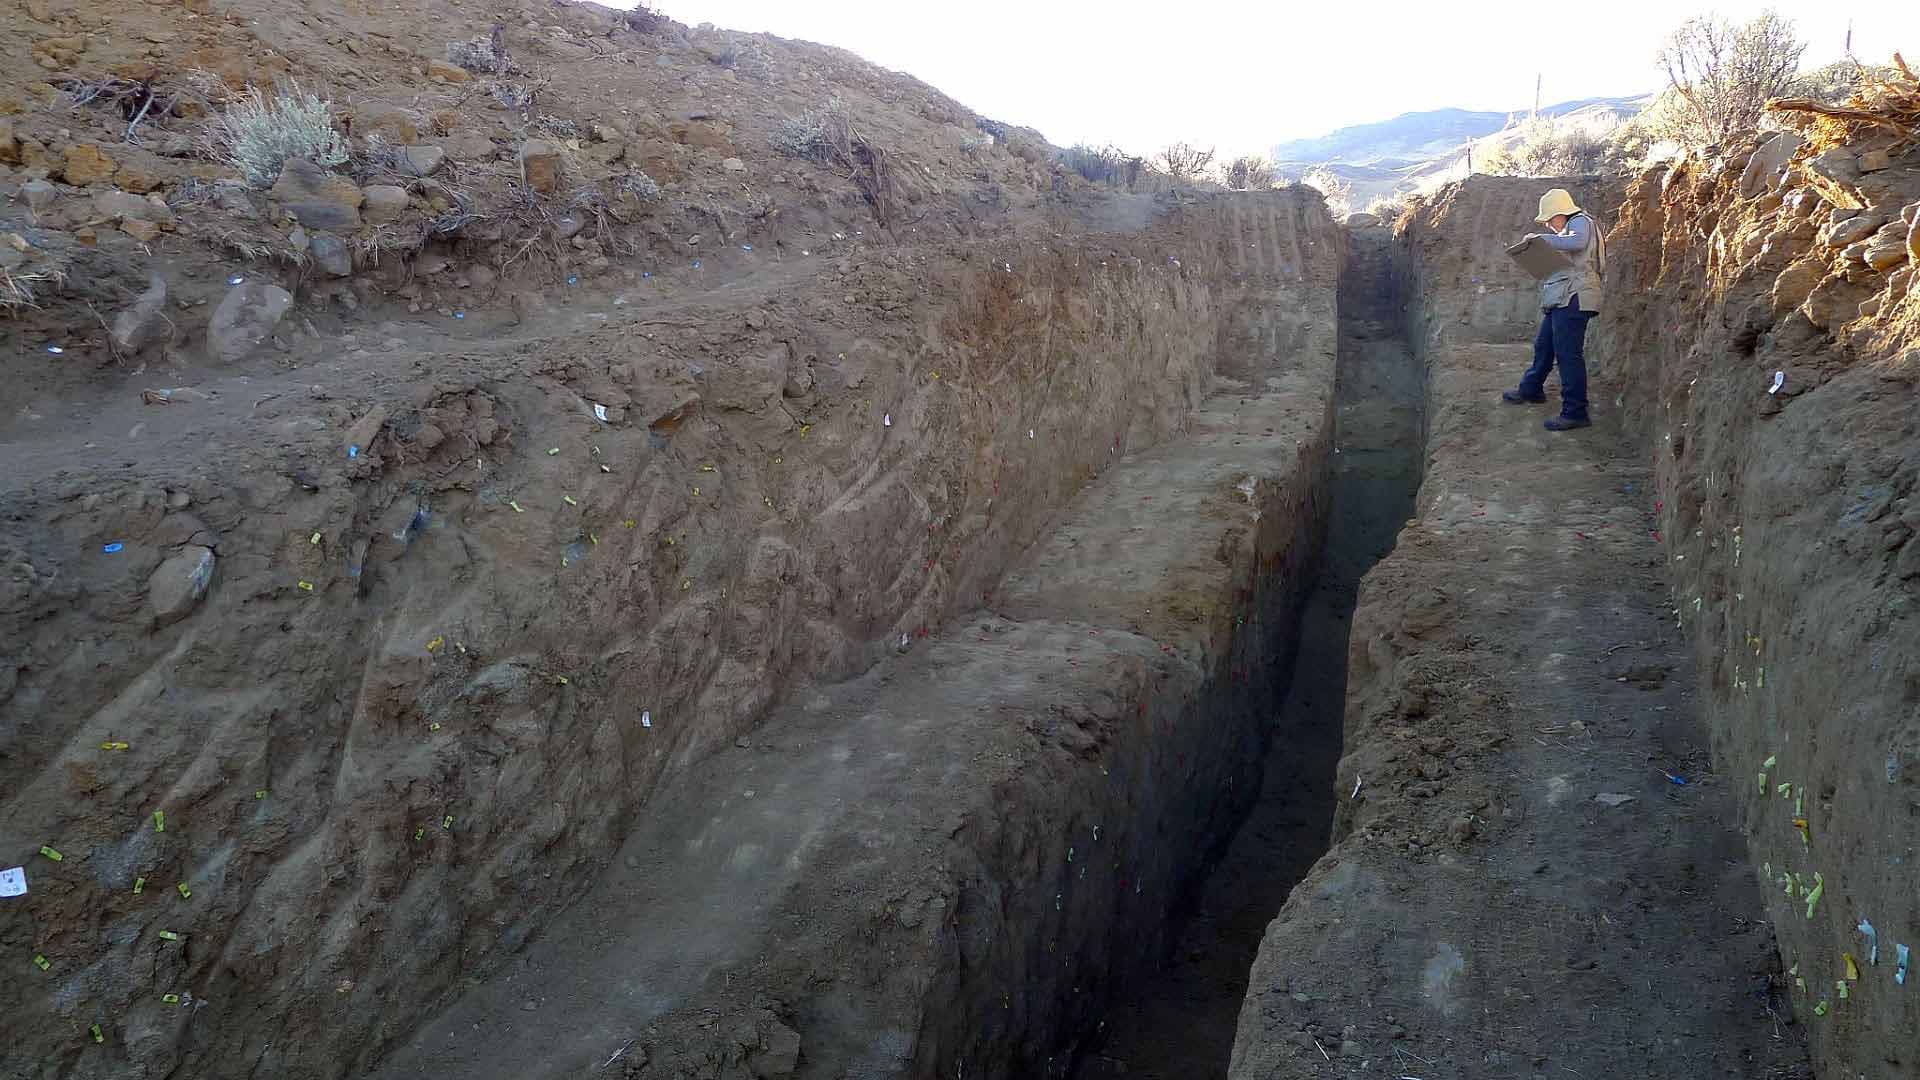 A geologist looking into a cleaned out trench exposing a fault caused by the Ridgecrest quake